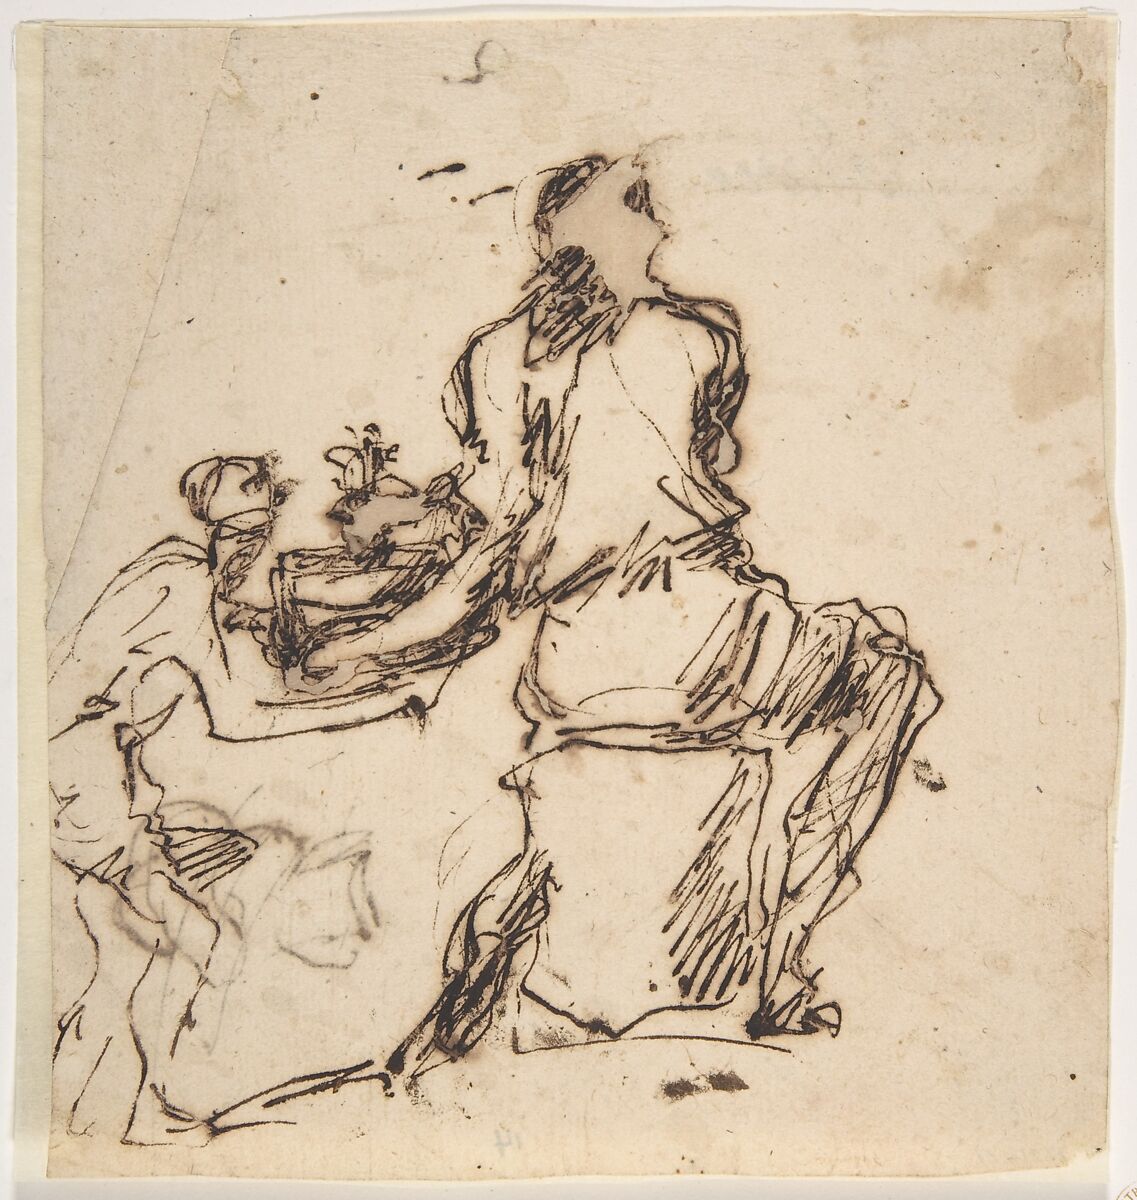 Seated Figure Receiving an Object Presented by a Smaller Figure, Micco Spadaro (Domenico Gargiulo) (Italian, Naples 1609/10–1675 Naples (?)), Pen and brown ink 